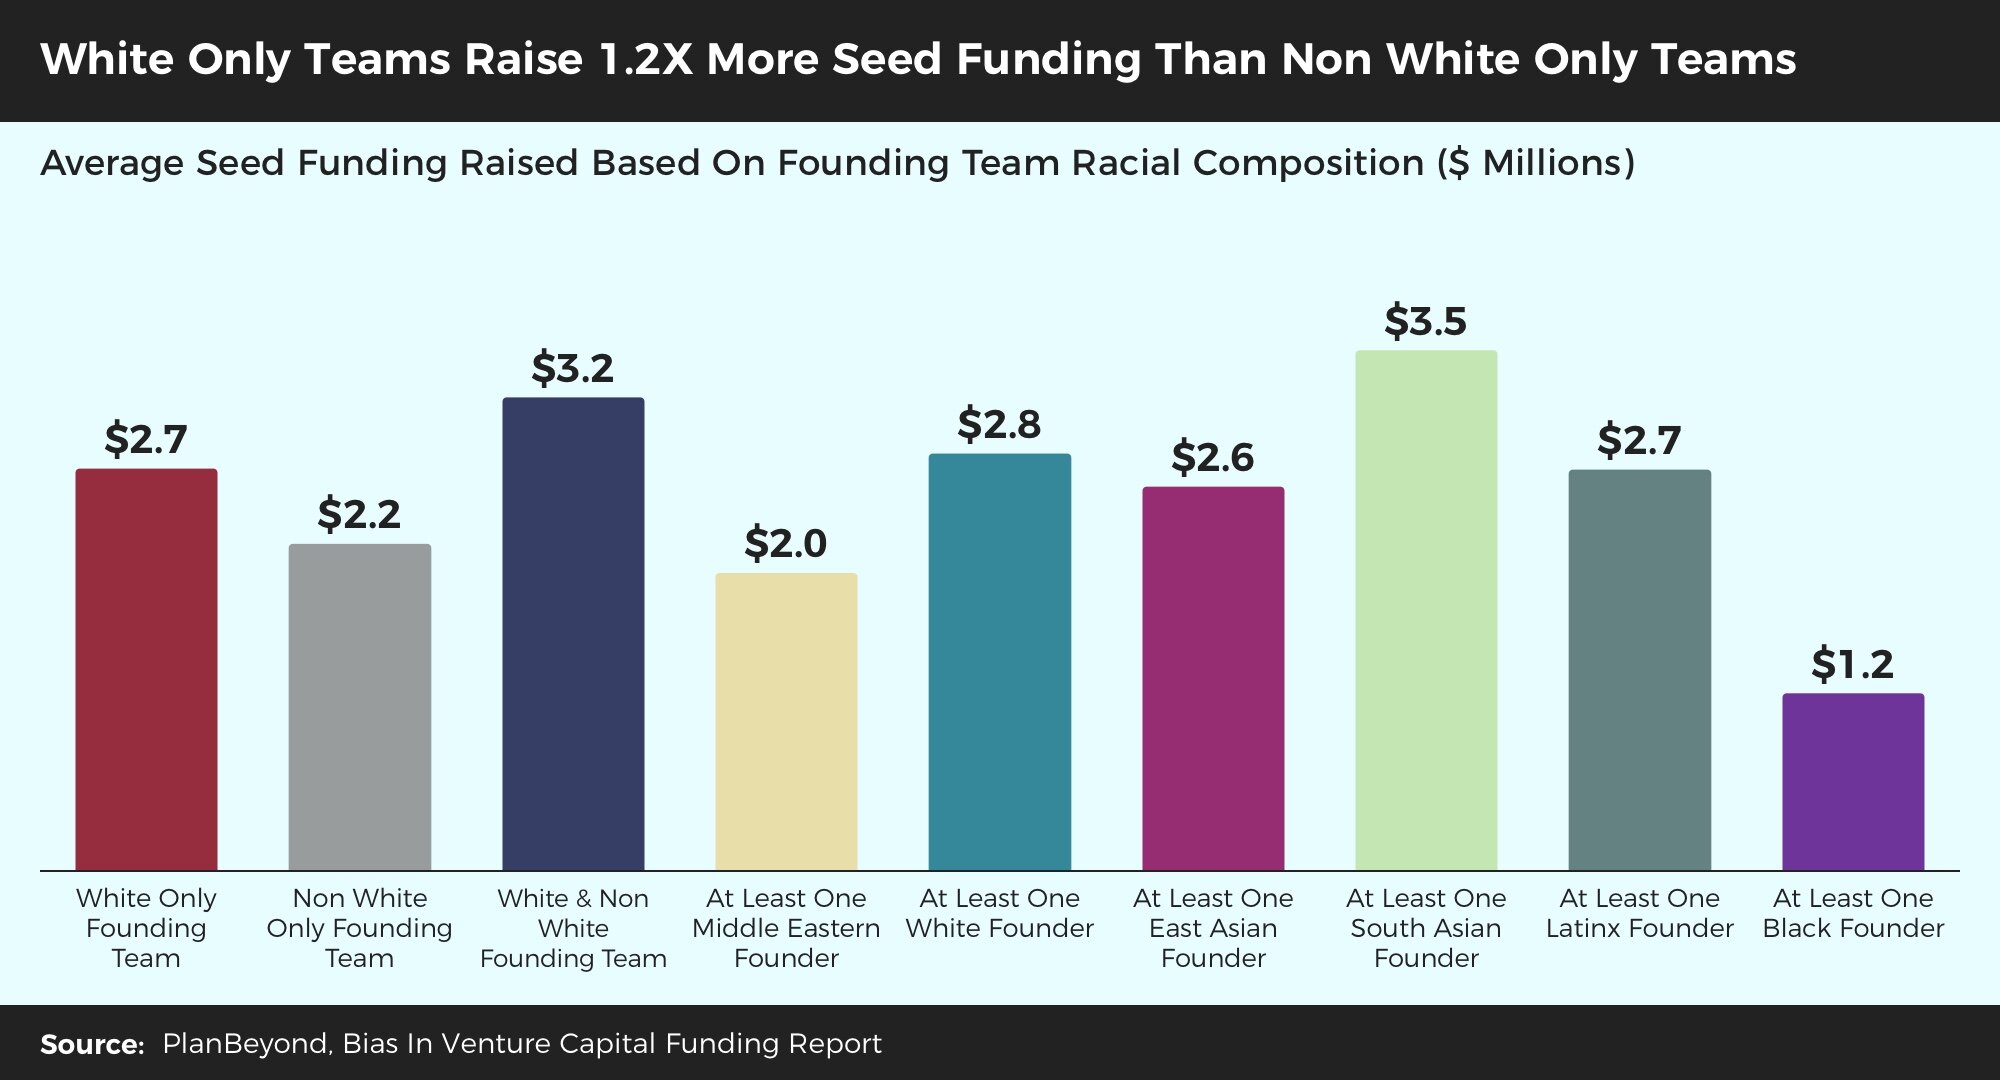 Bias+In+Venture+Funding+Report+-+White+Only+Teams+Raise+More+Seed+Funding+Than+Non+White+Teams